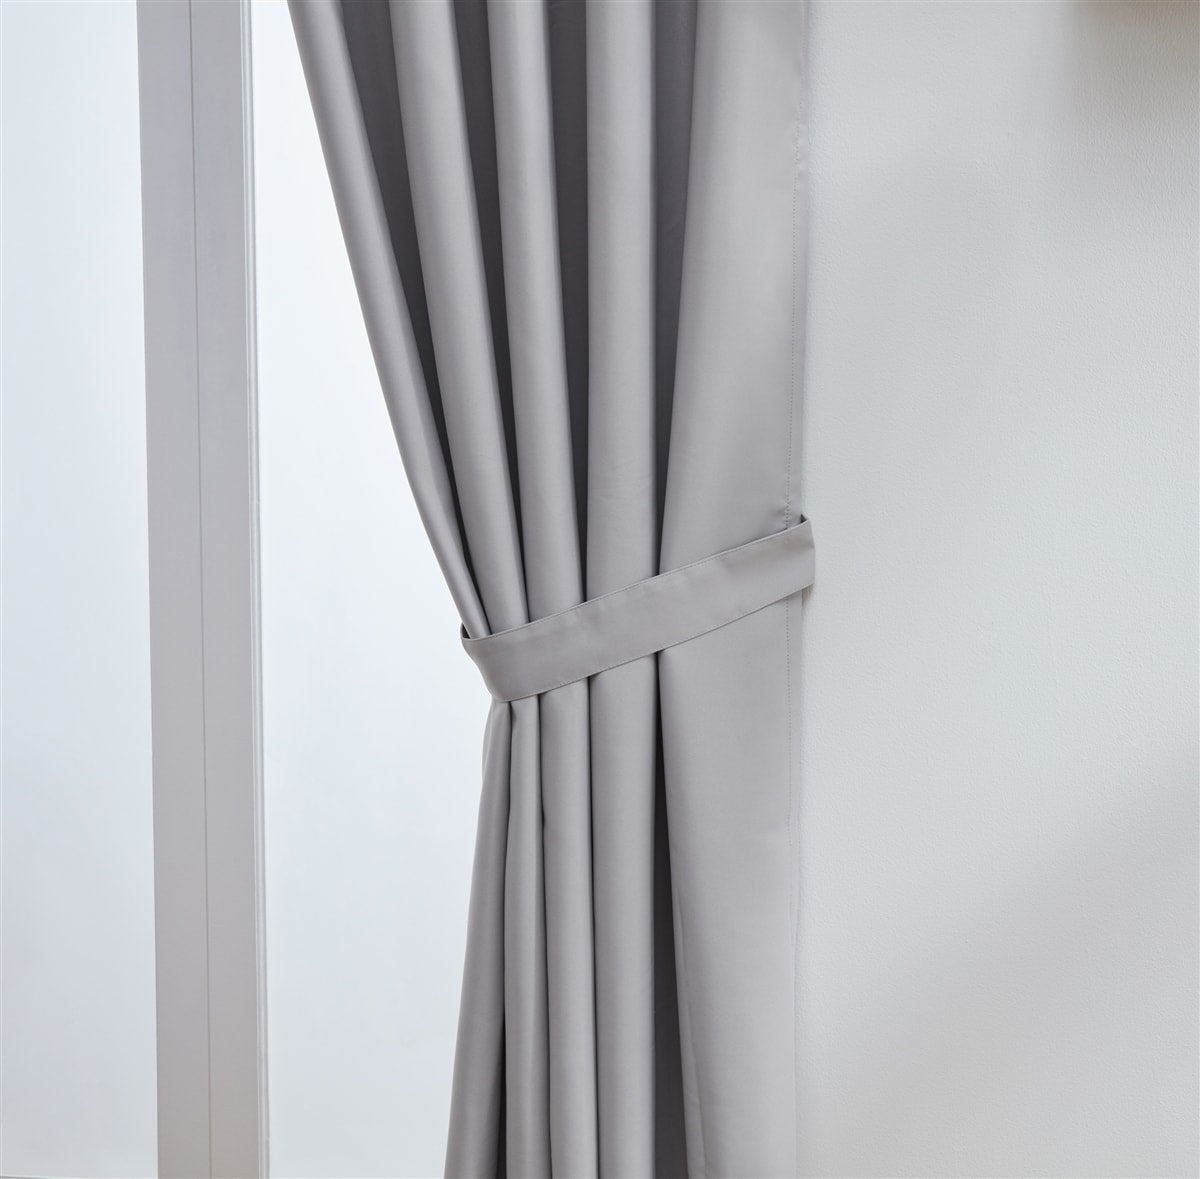 Thermal Blackout Ready Made Eyelet Curtains + Tie Backs (Silver)